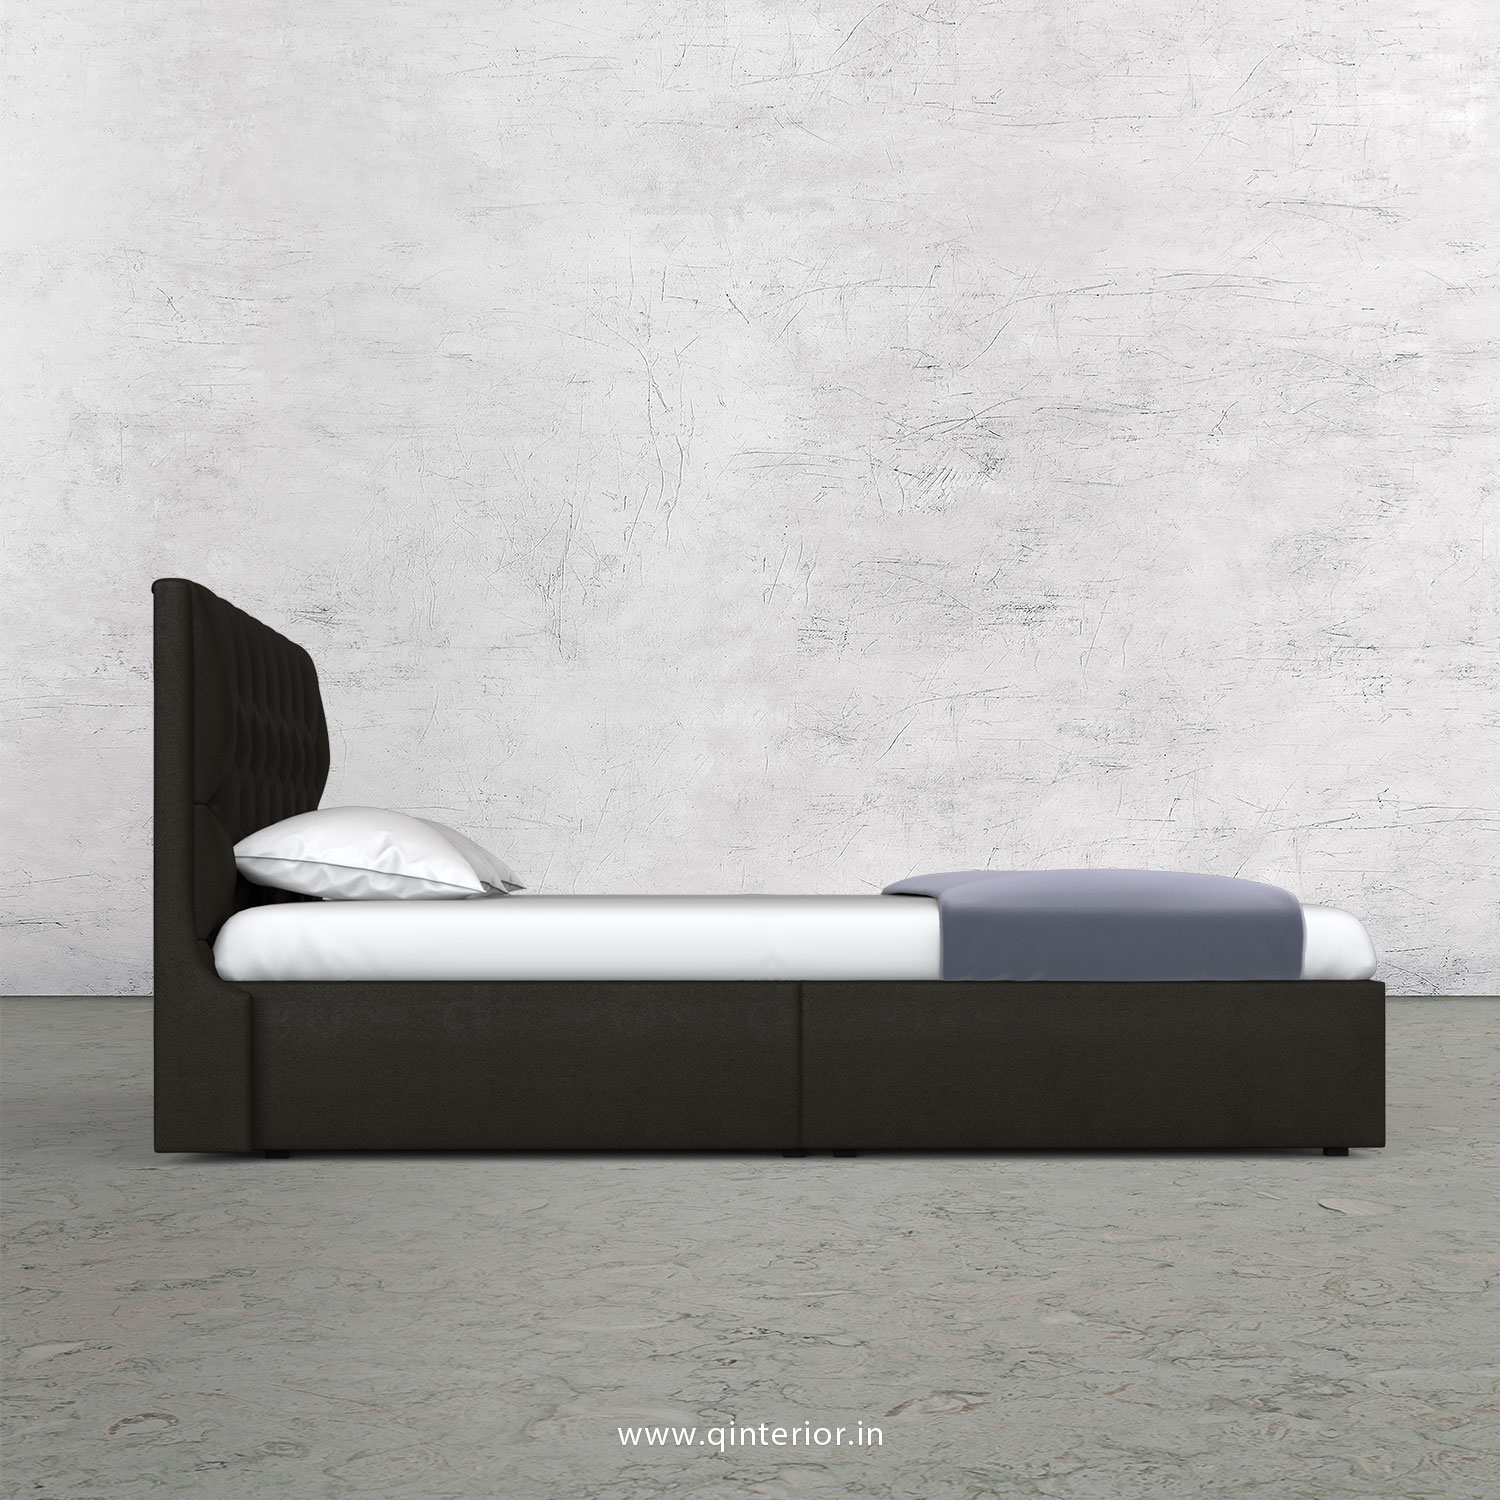 Scorpius King Size Storage Bed in Fab Leather Fabric - KBD001 FL11